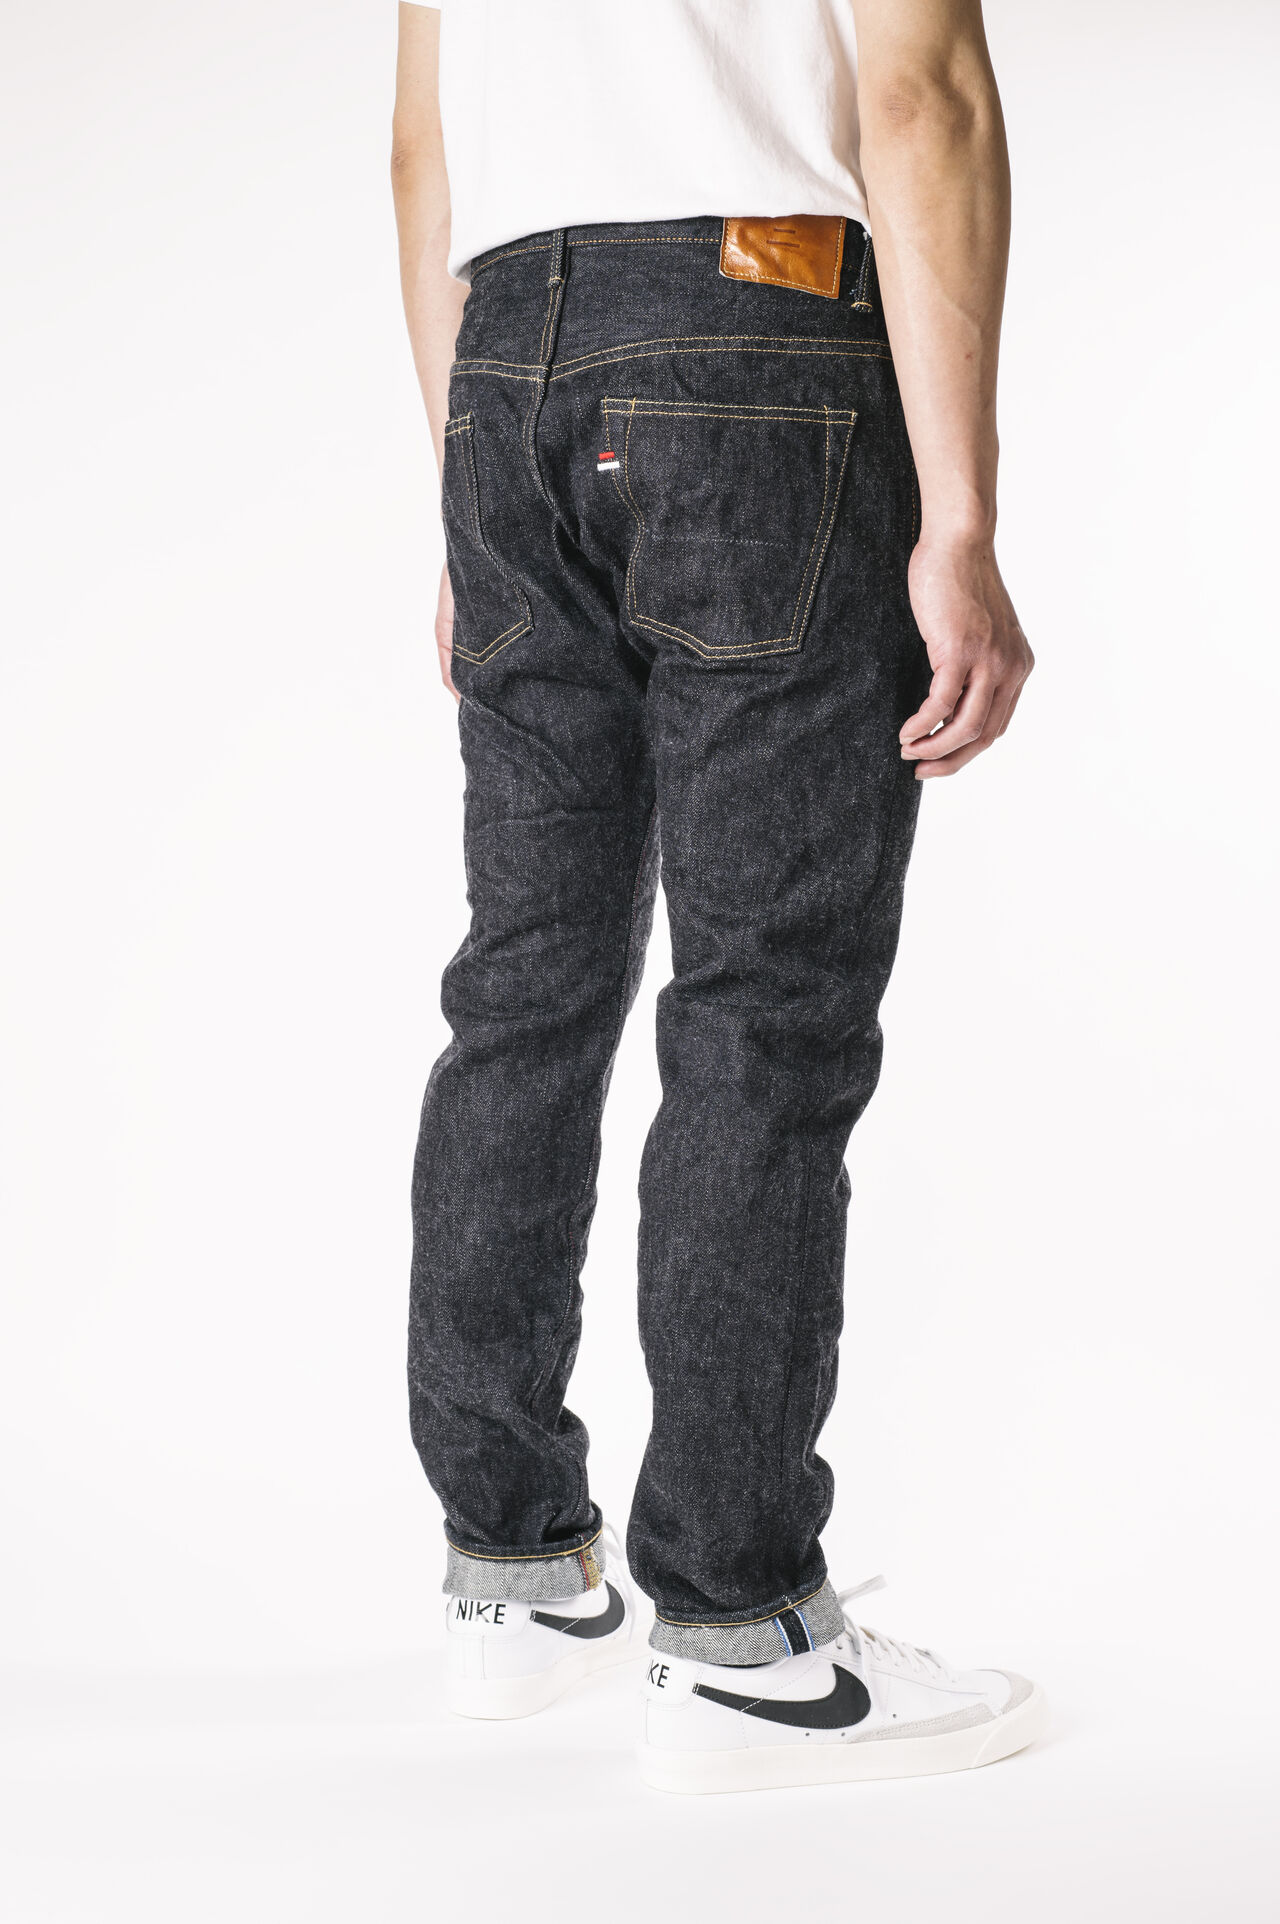 RCT 16.5OZ Red Cast Tapered Jeans,, large image number 4